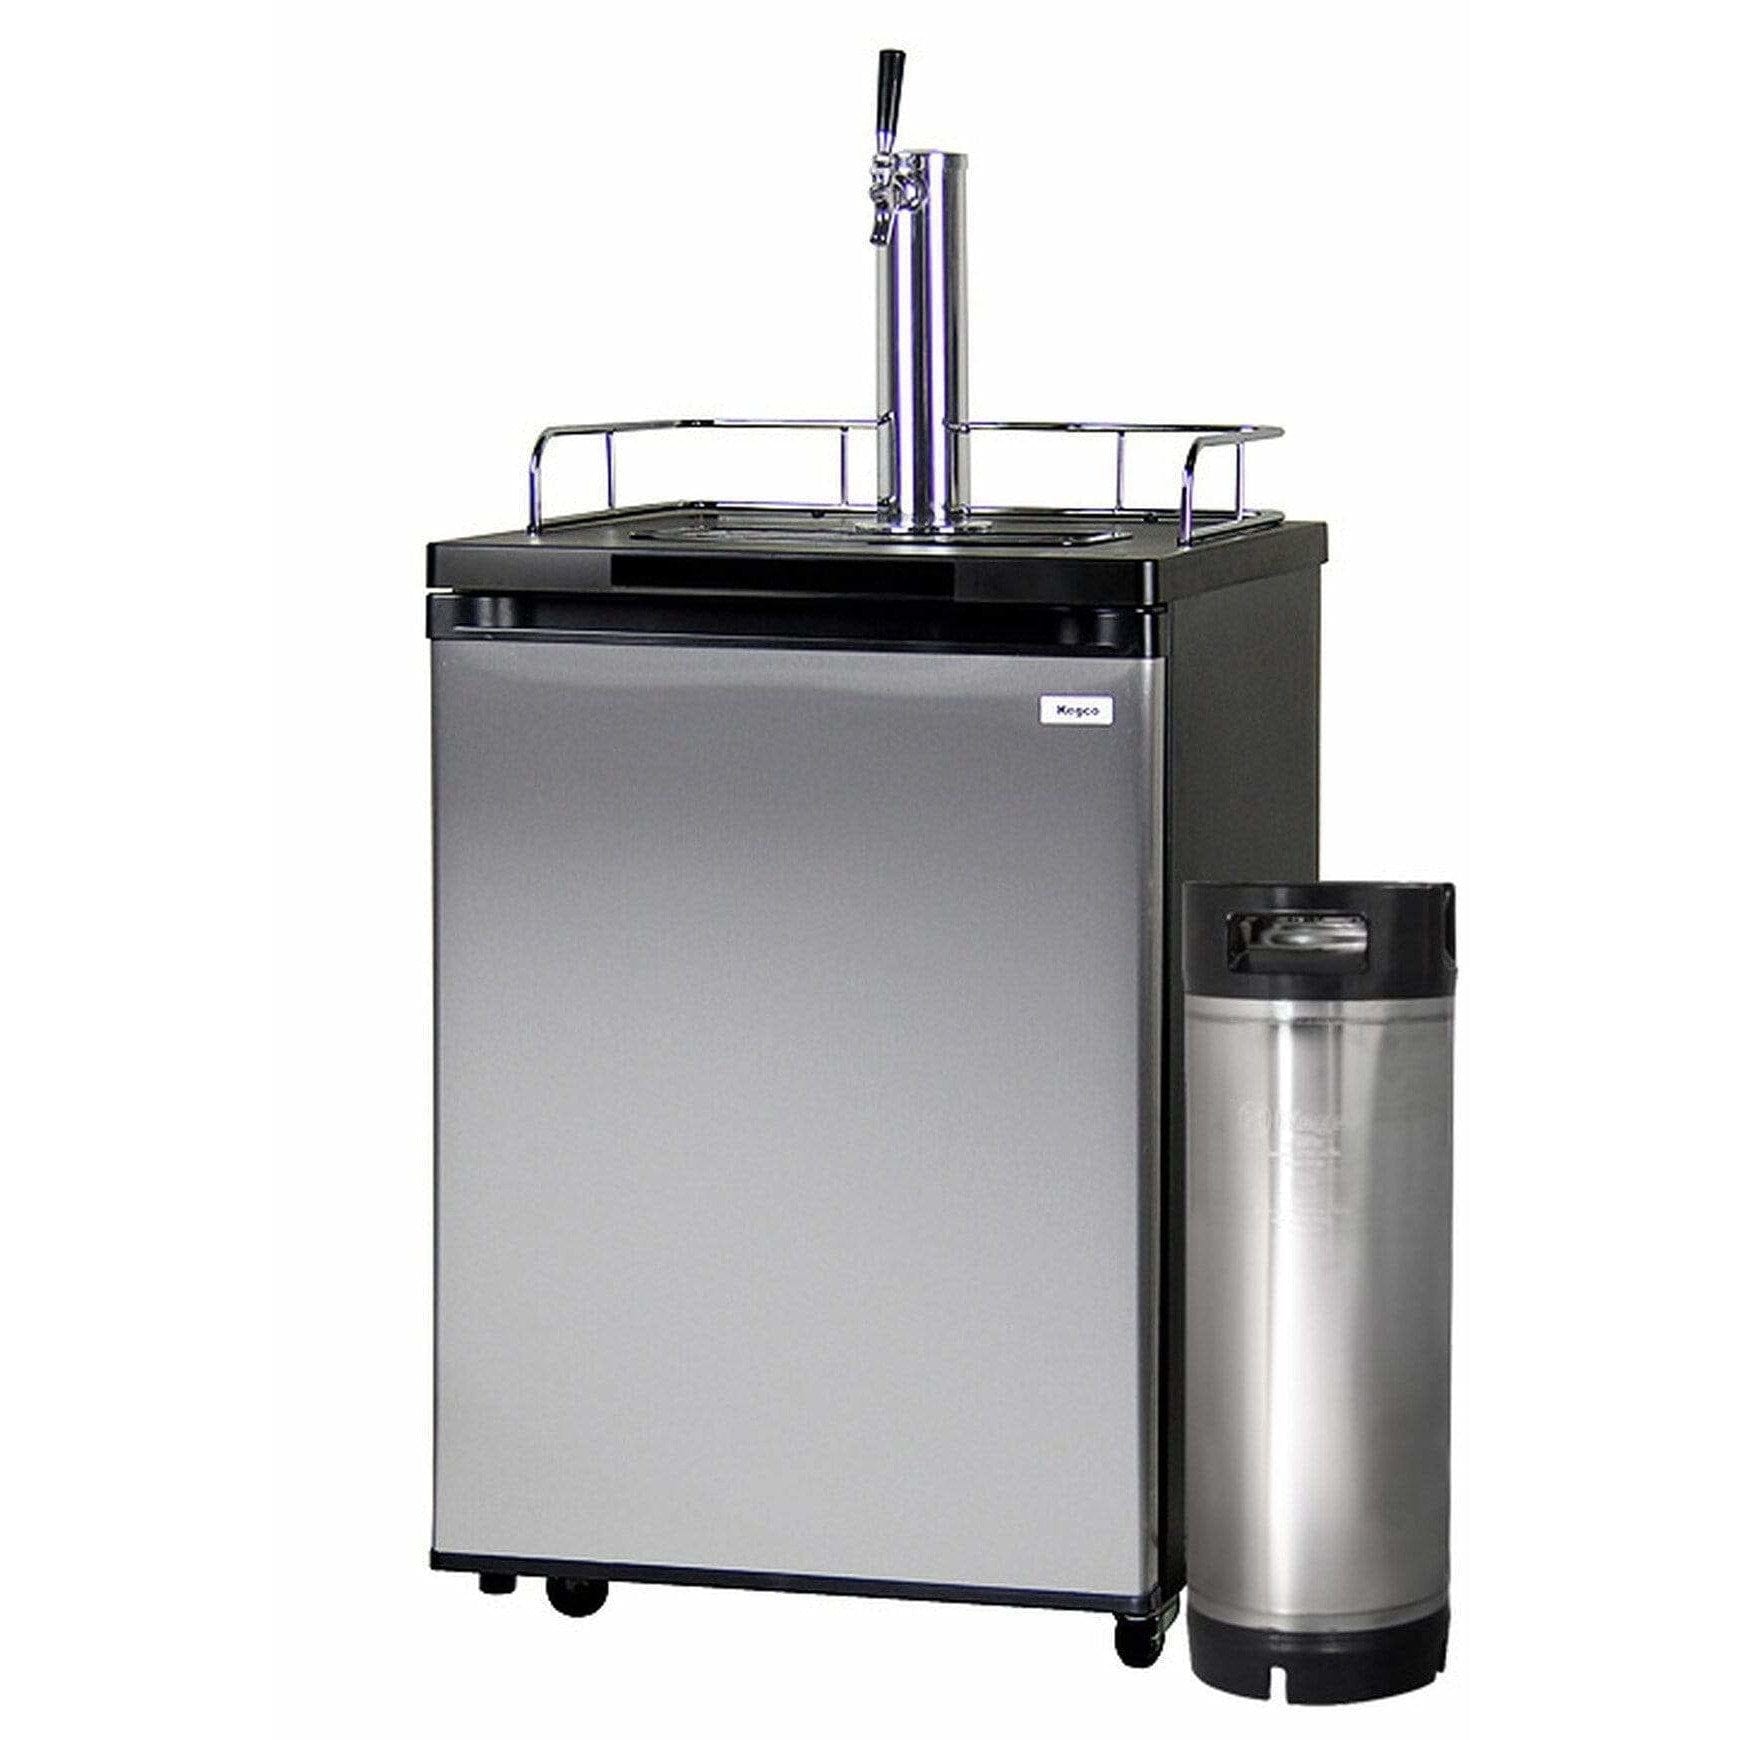 Kegco Home Brew Kegerator- Black Cabinet with Stainless Steel Door Home Brew HBK209S-1K Wine Coolers Empire